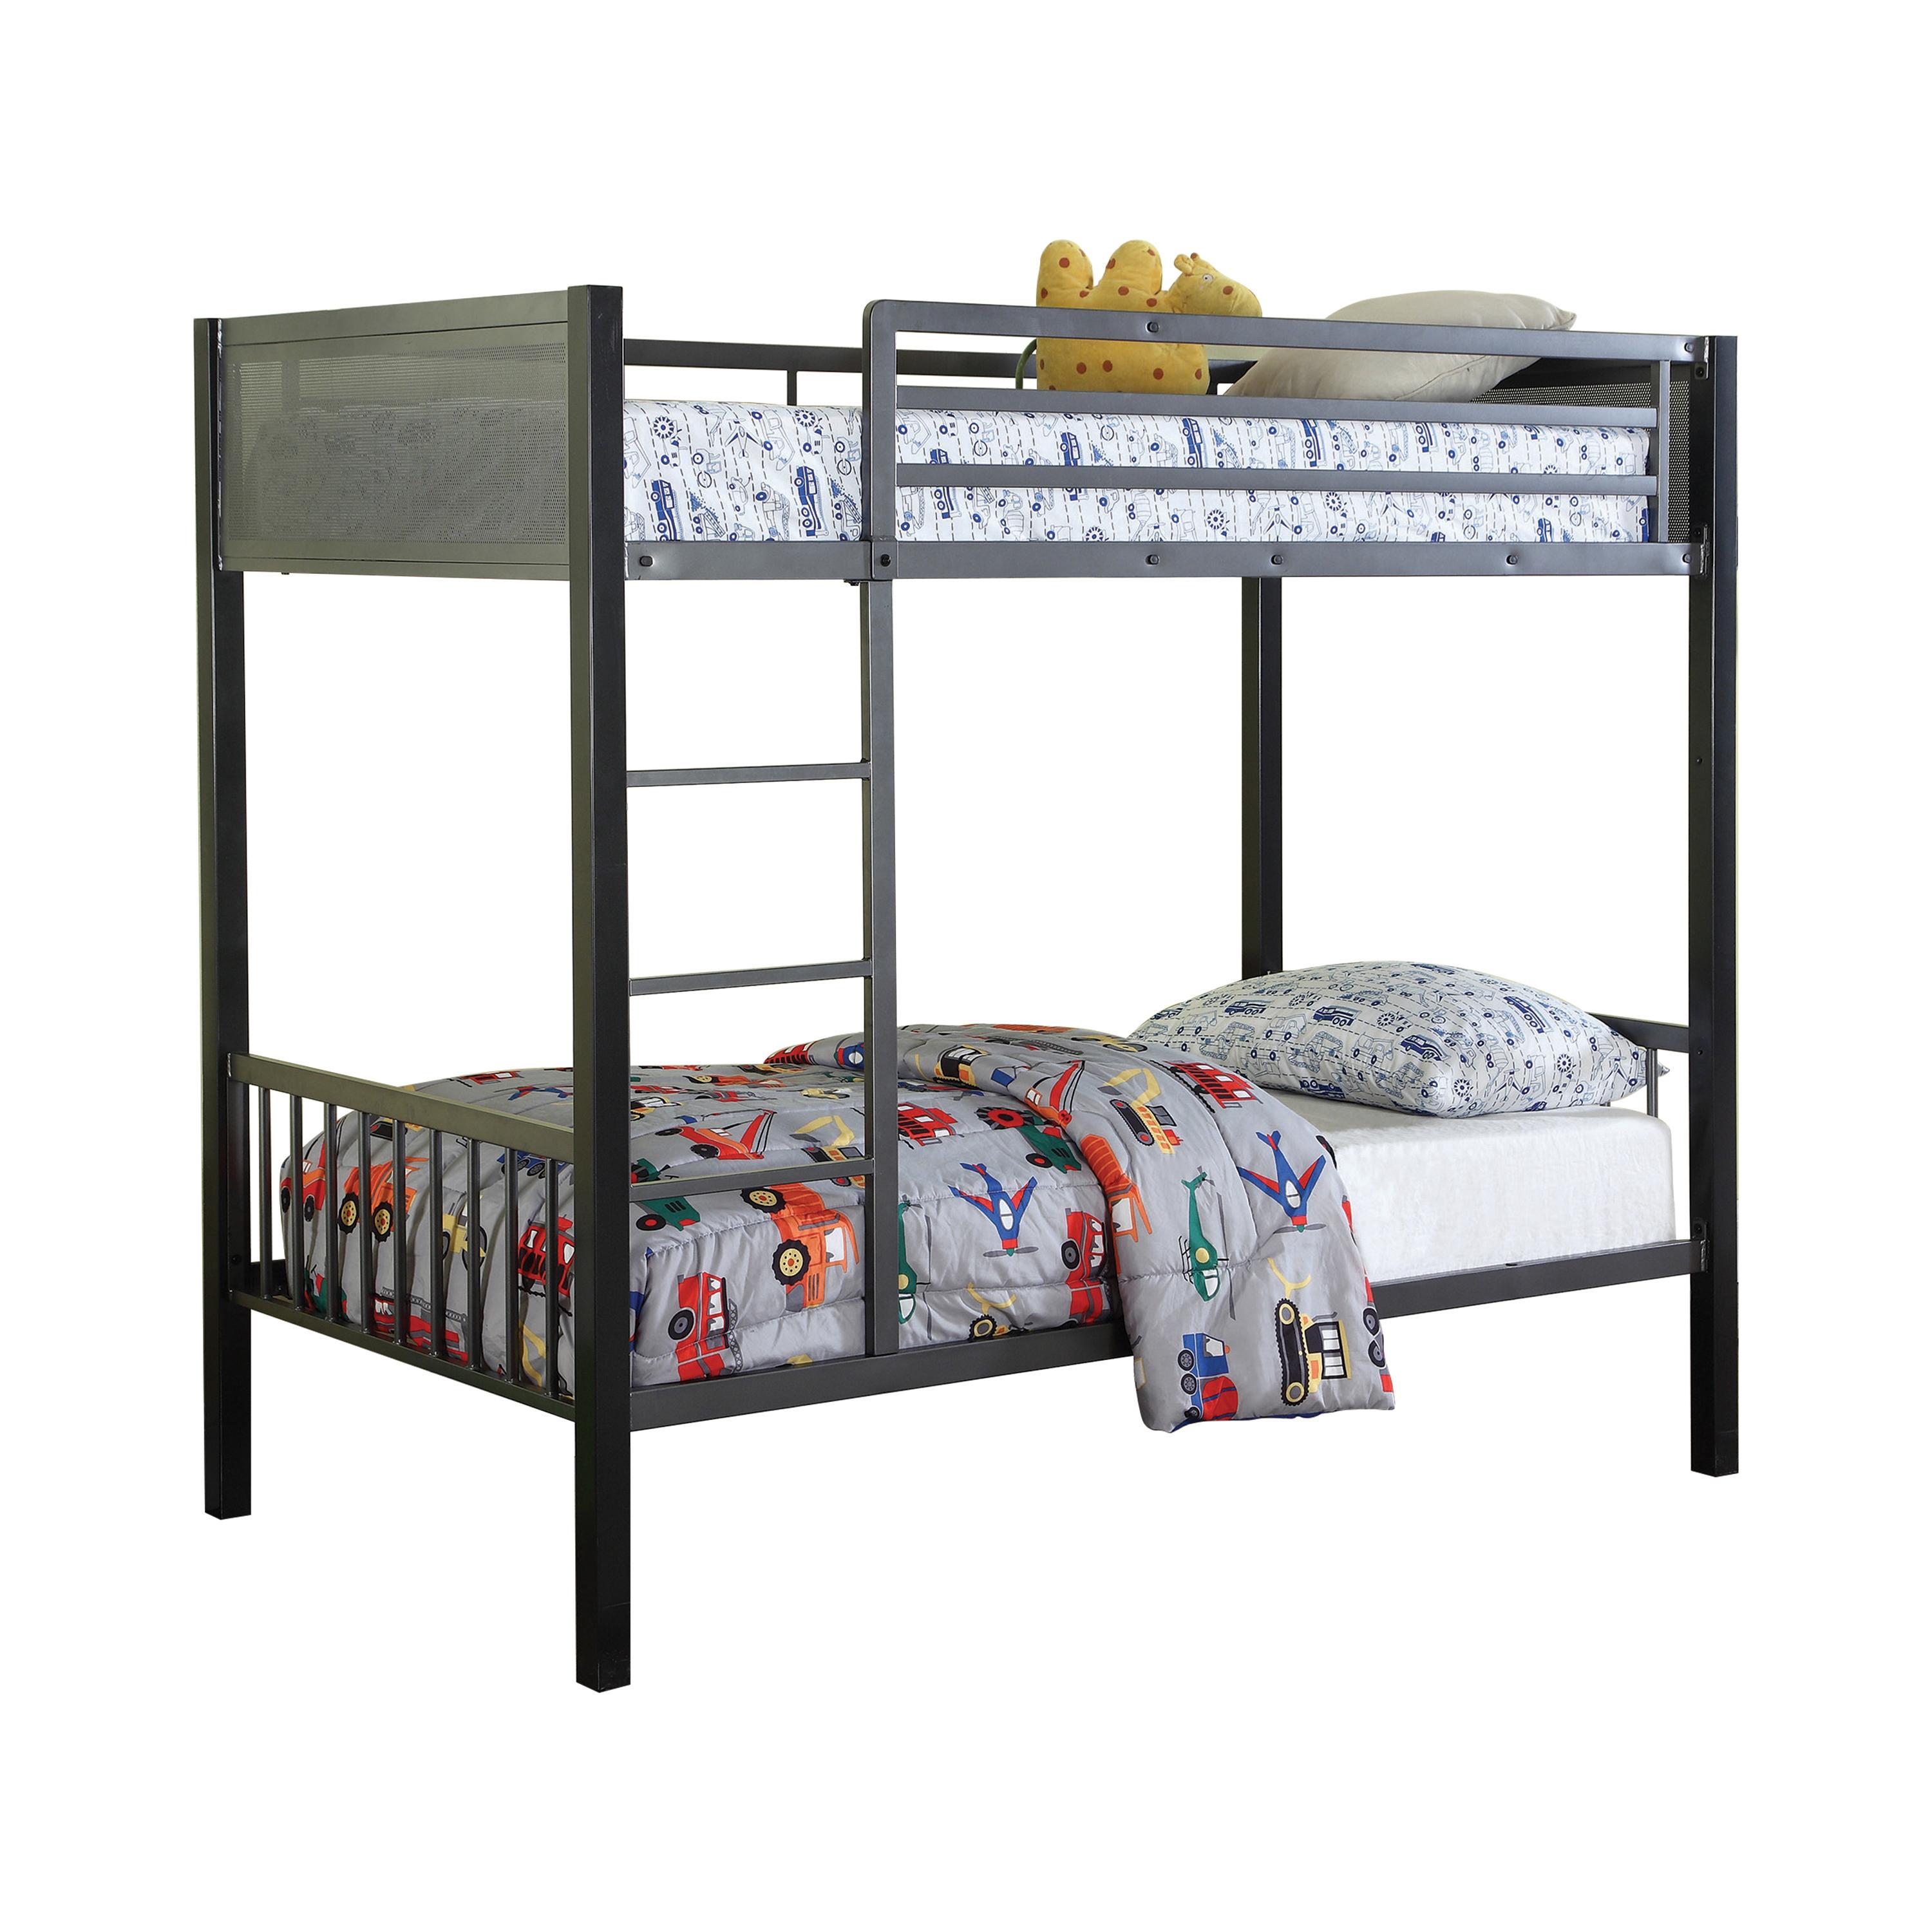 Transitional Bunk Bed 460390 Meyers 460390 in Black 